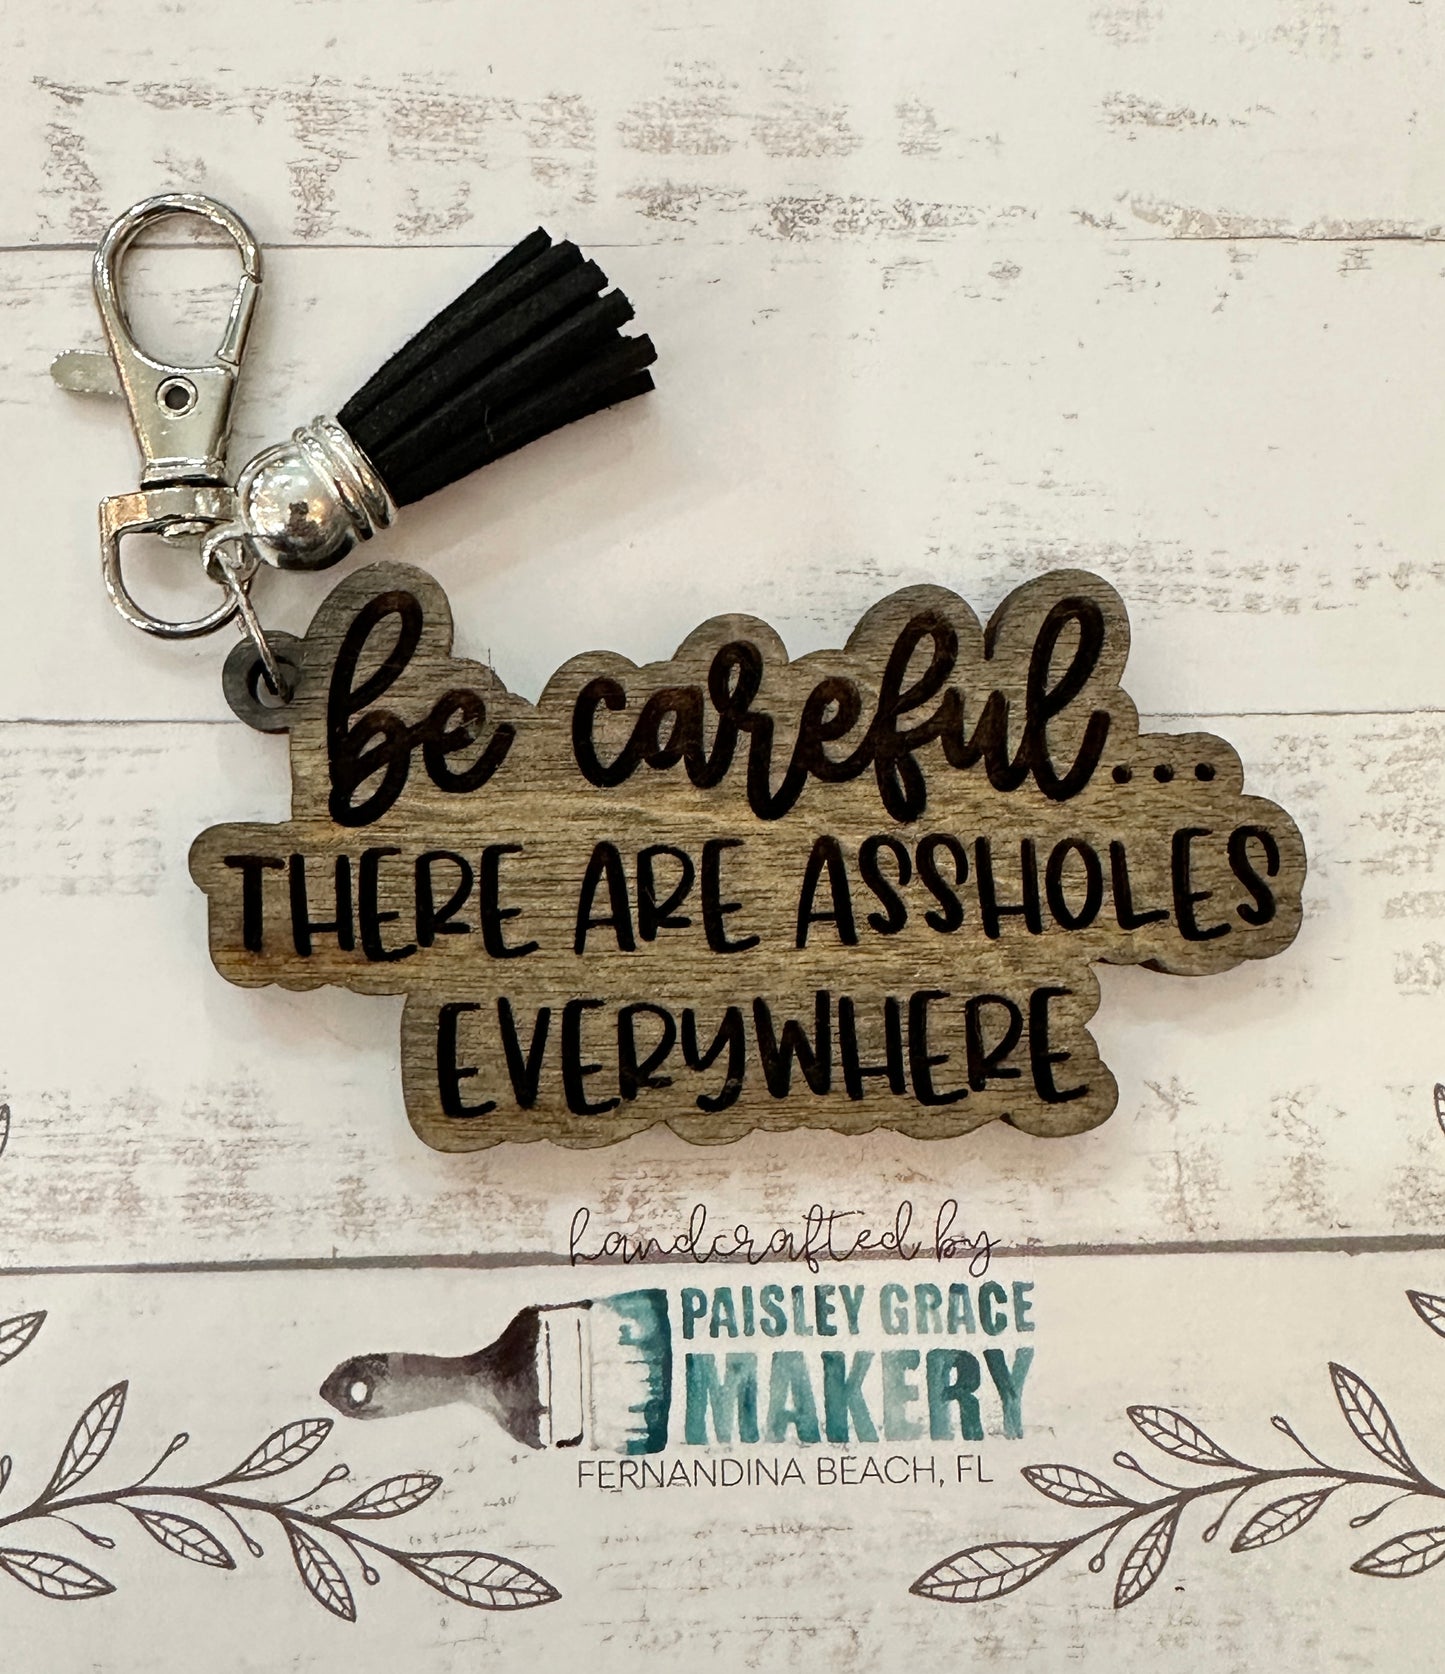 Be Careful, There are $#@hole Everywhere Keychain